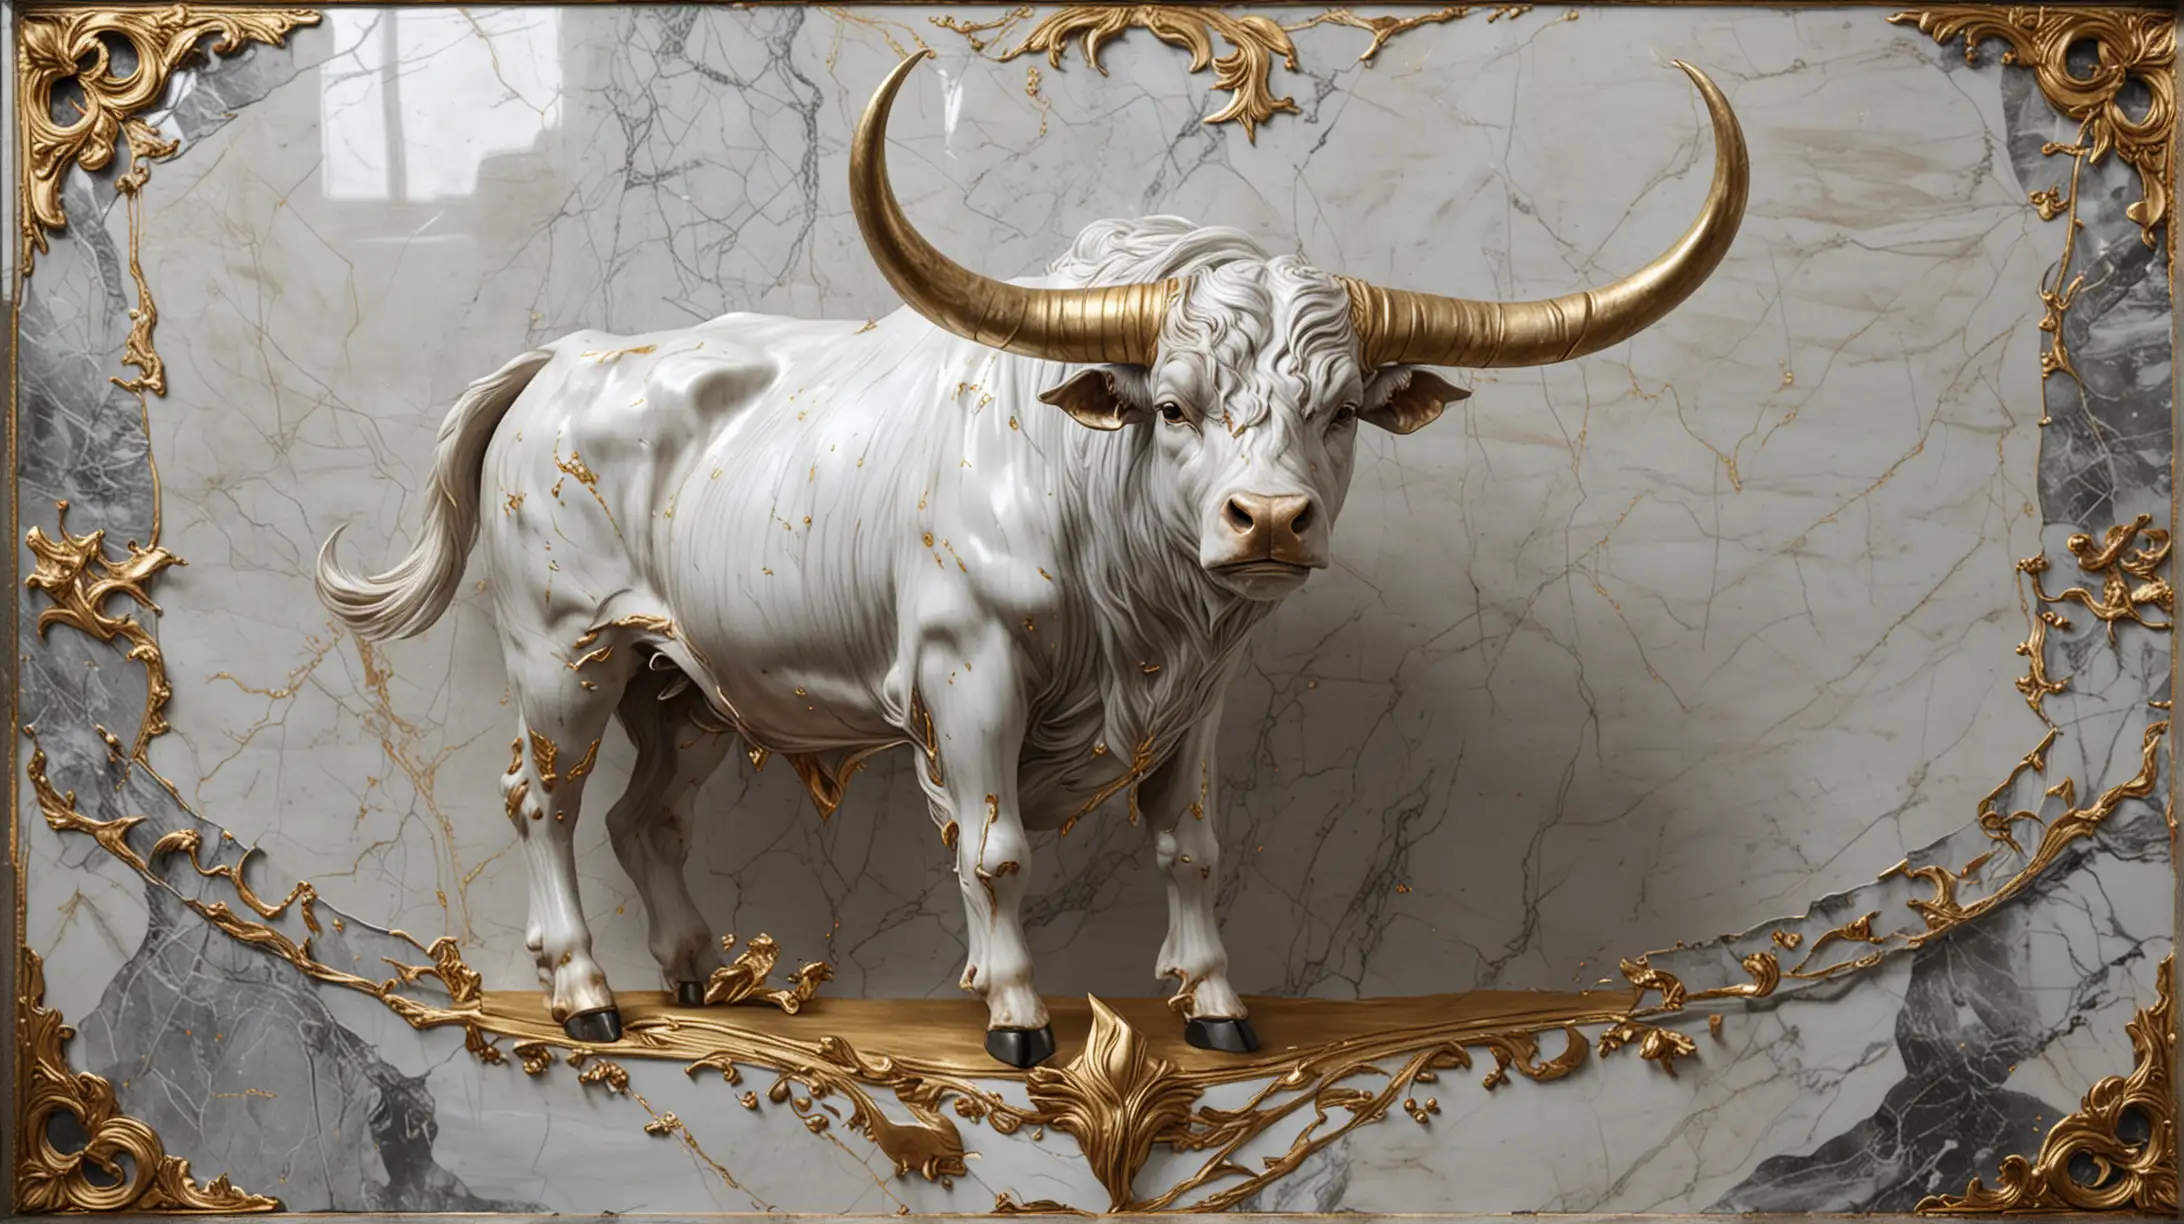 Marmor Stier in epic style, silver and gold lining